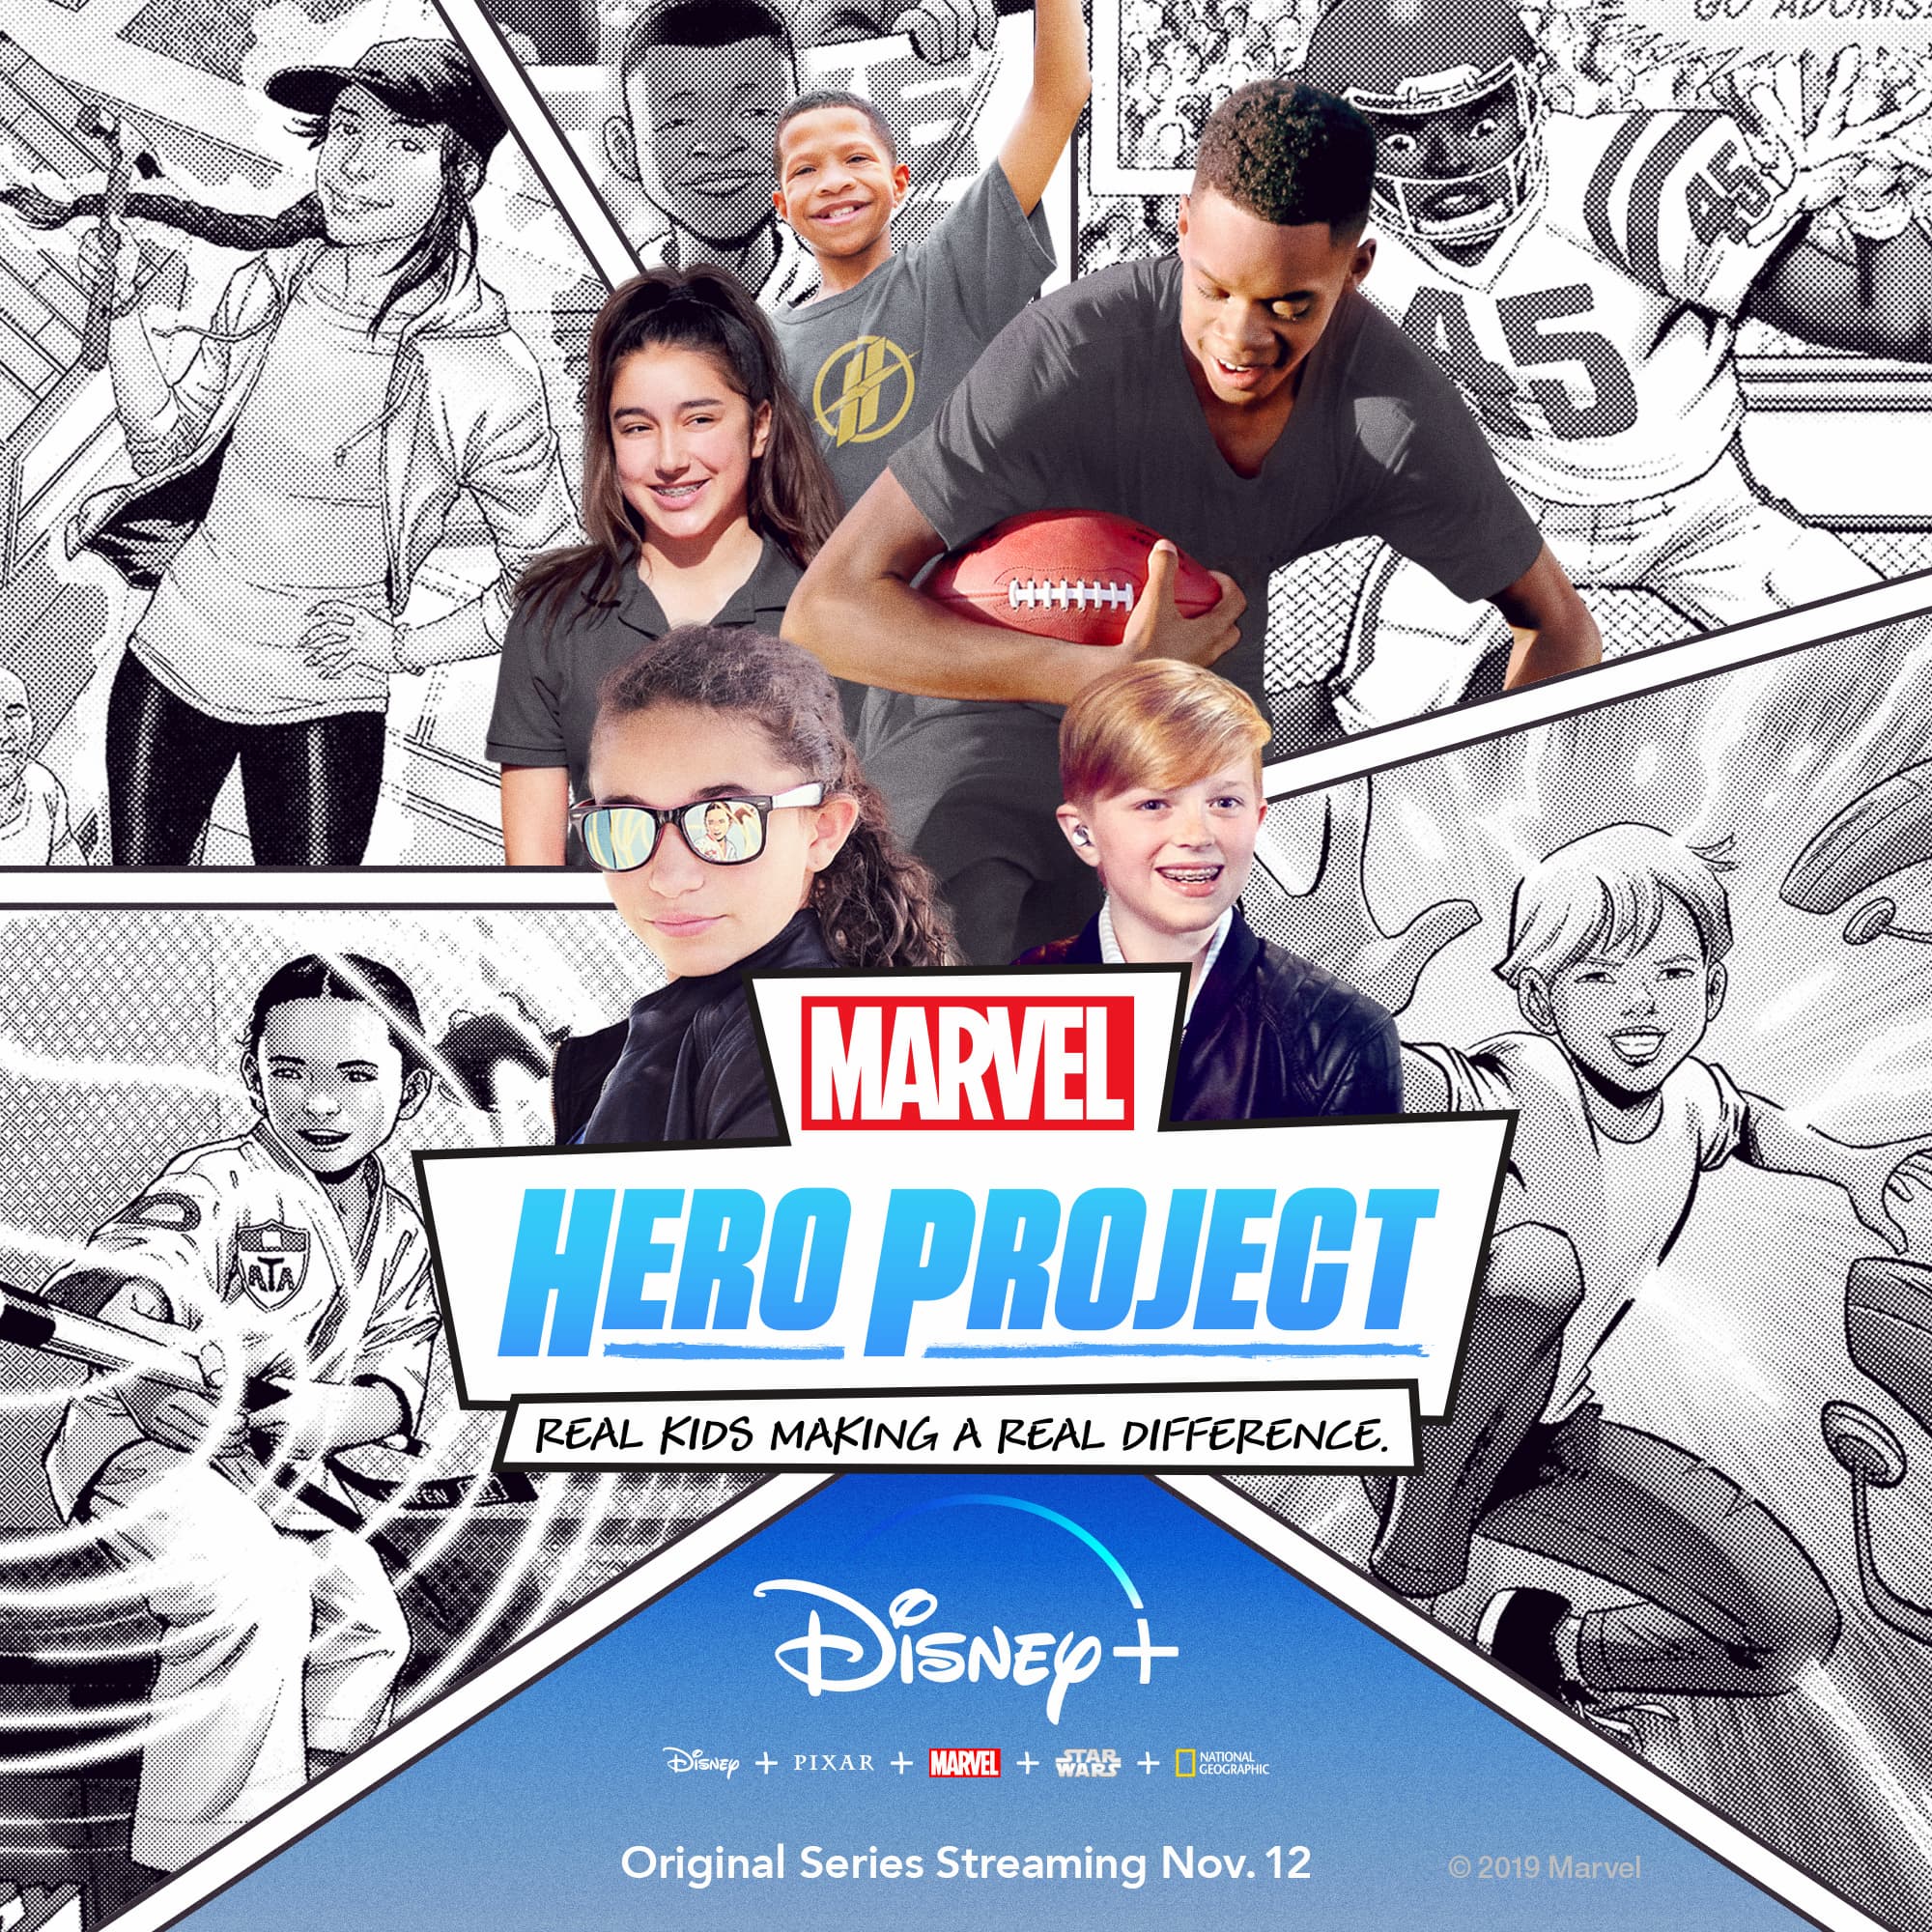 Why Marvel’s Hero Project Is One of My New Favorite Shows on Disney+